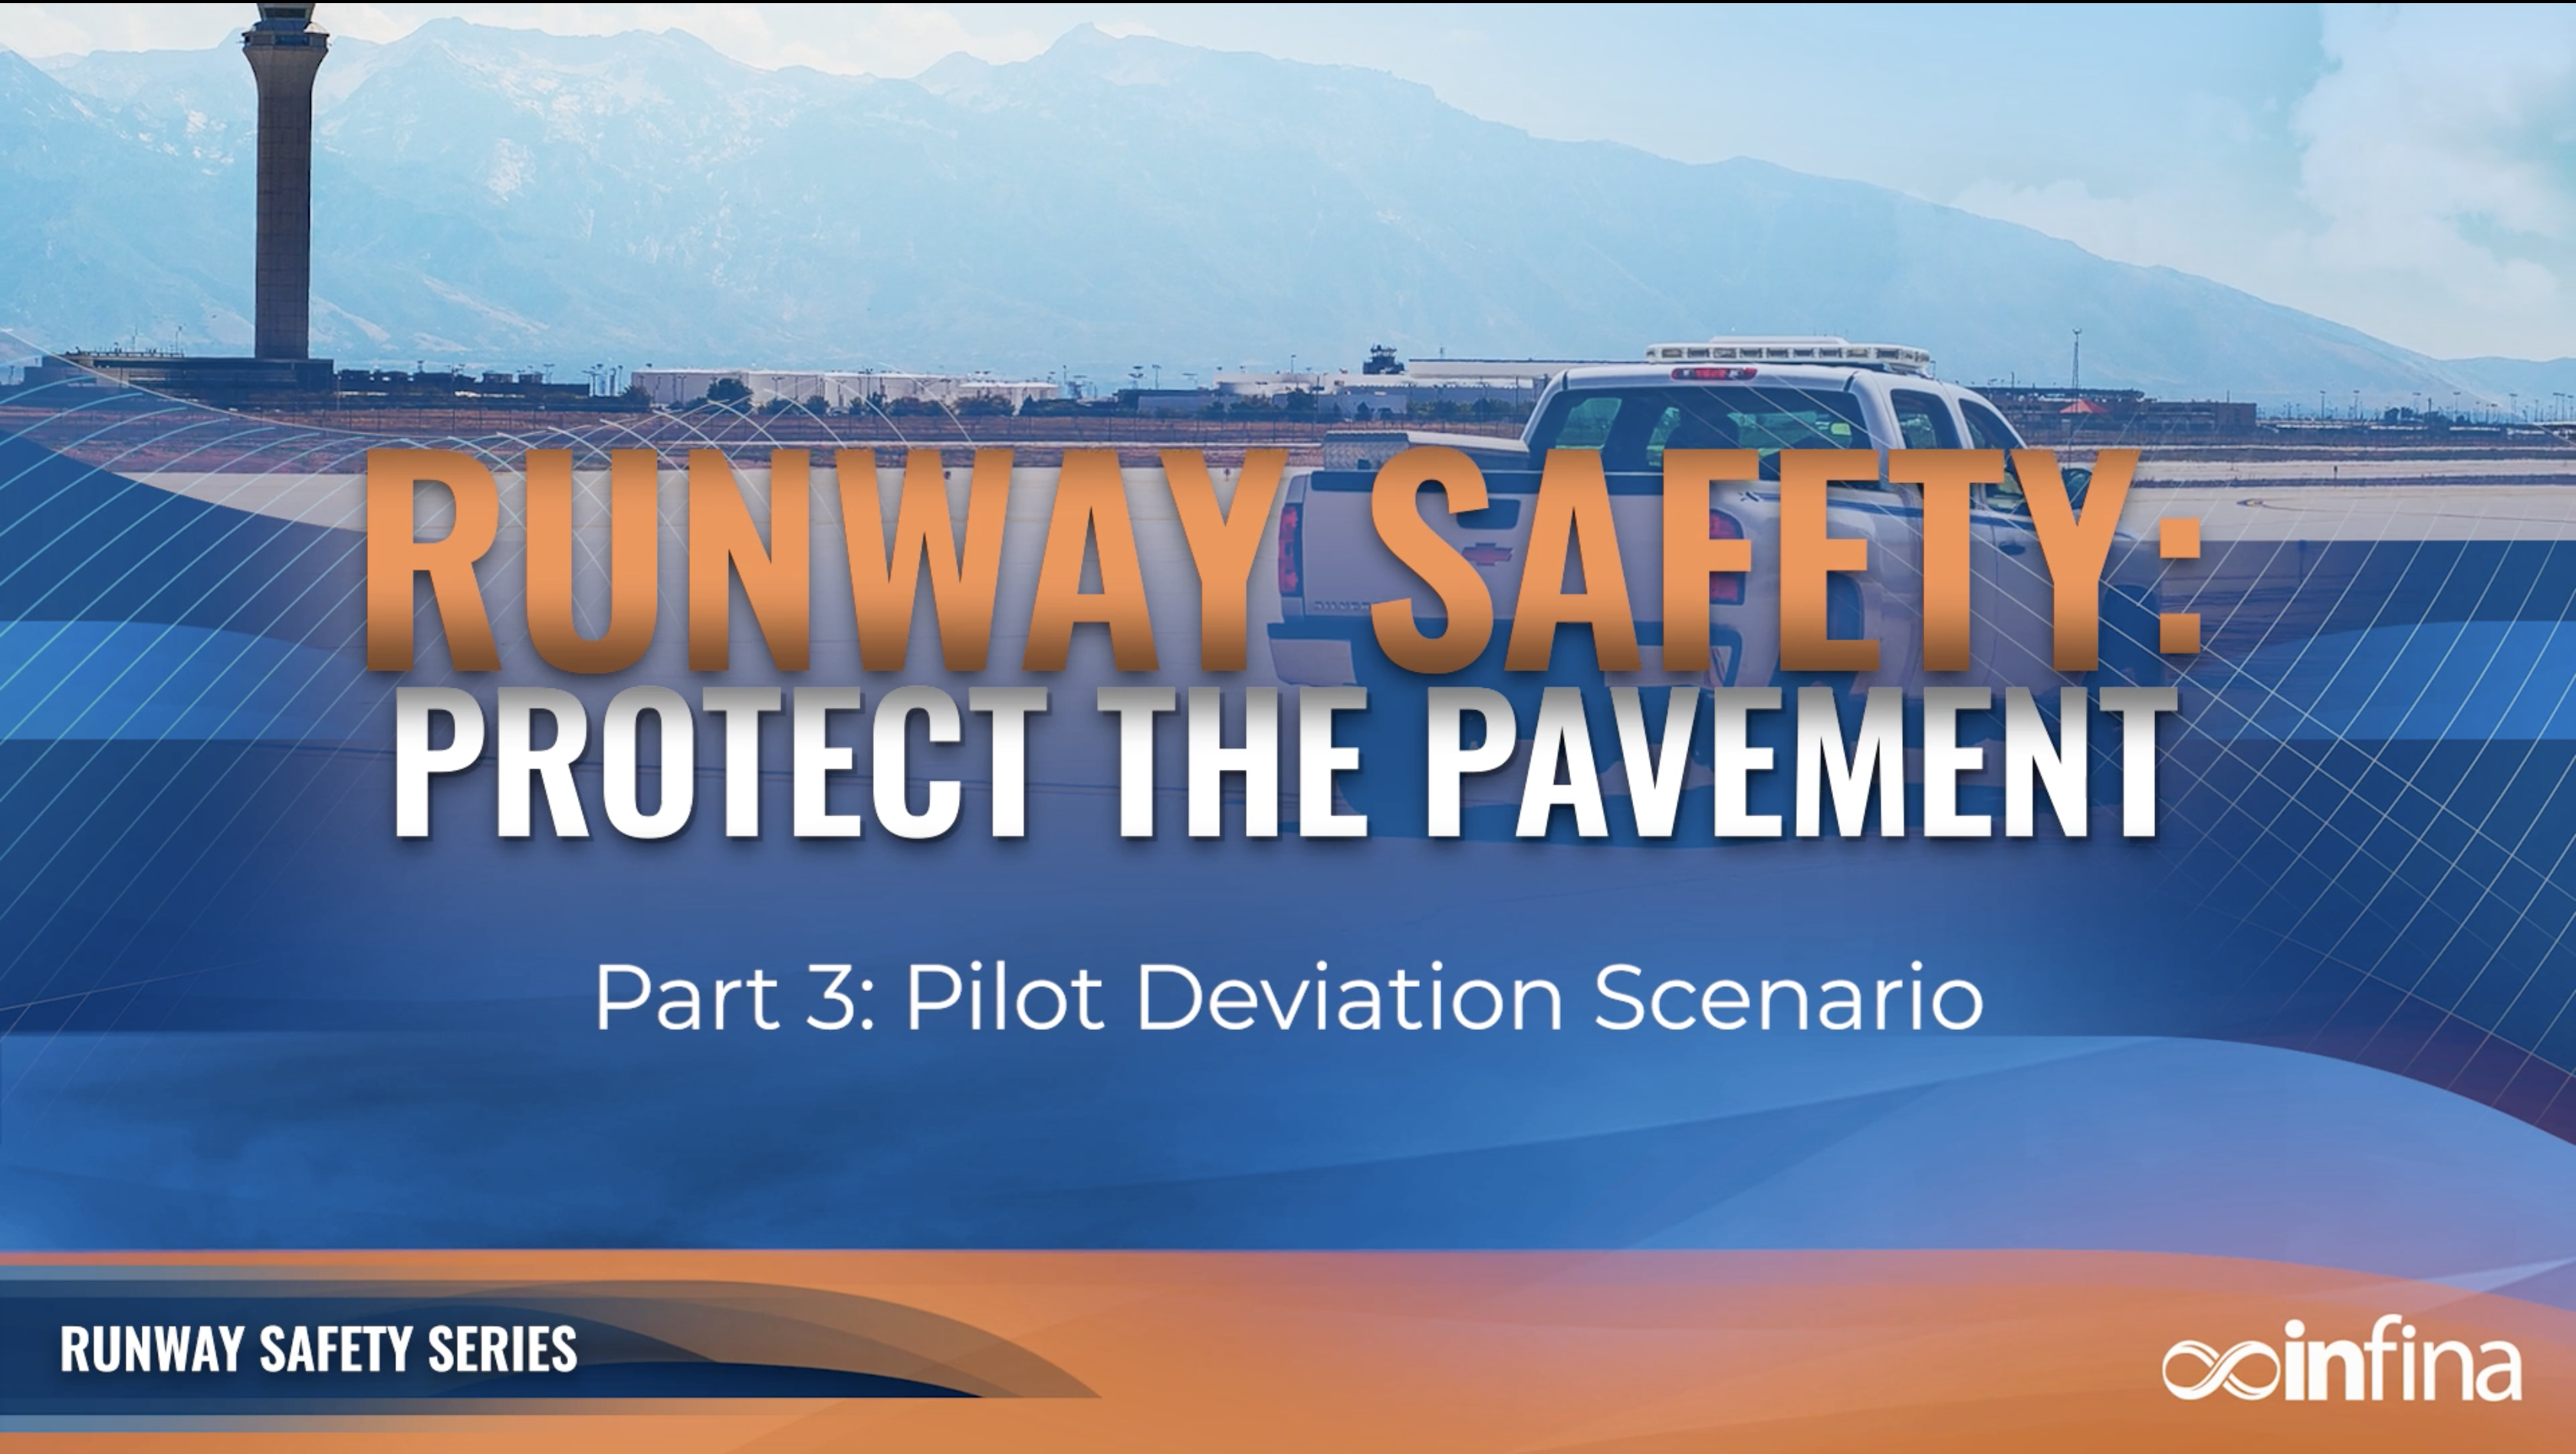 Runway Safety: Protect the Pavement Part 3 - Pilot Deviat...